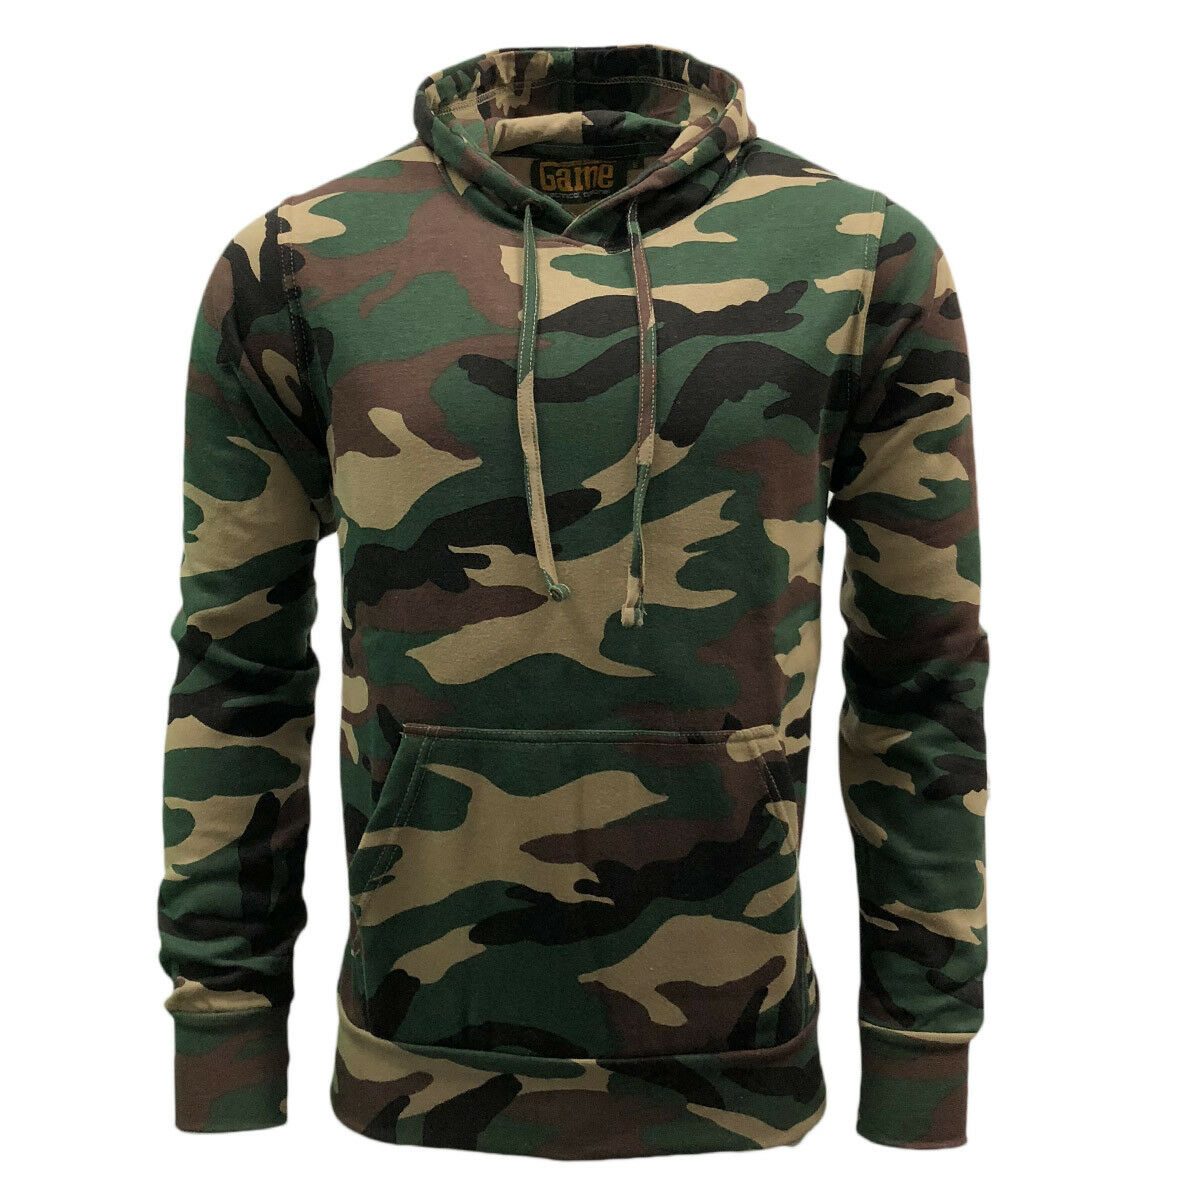 Men's Game Military Camouflage Army Hoody